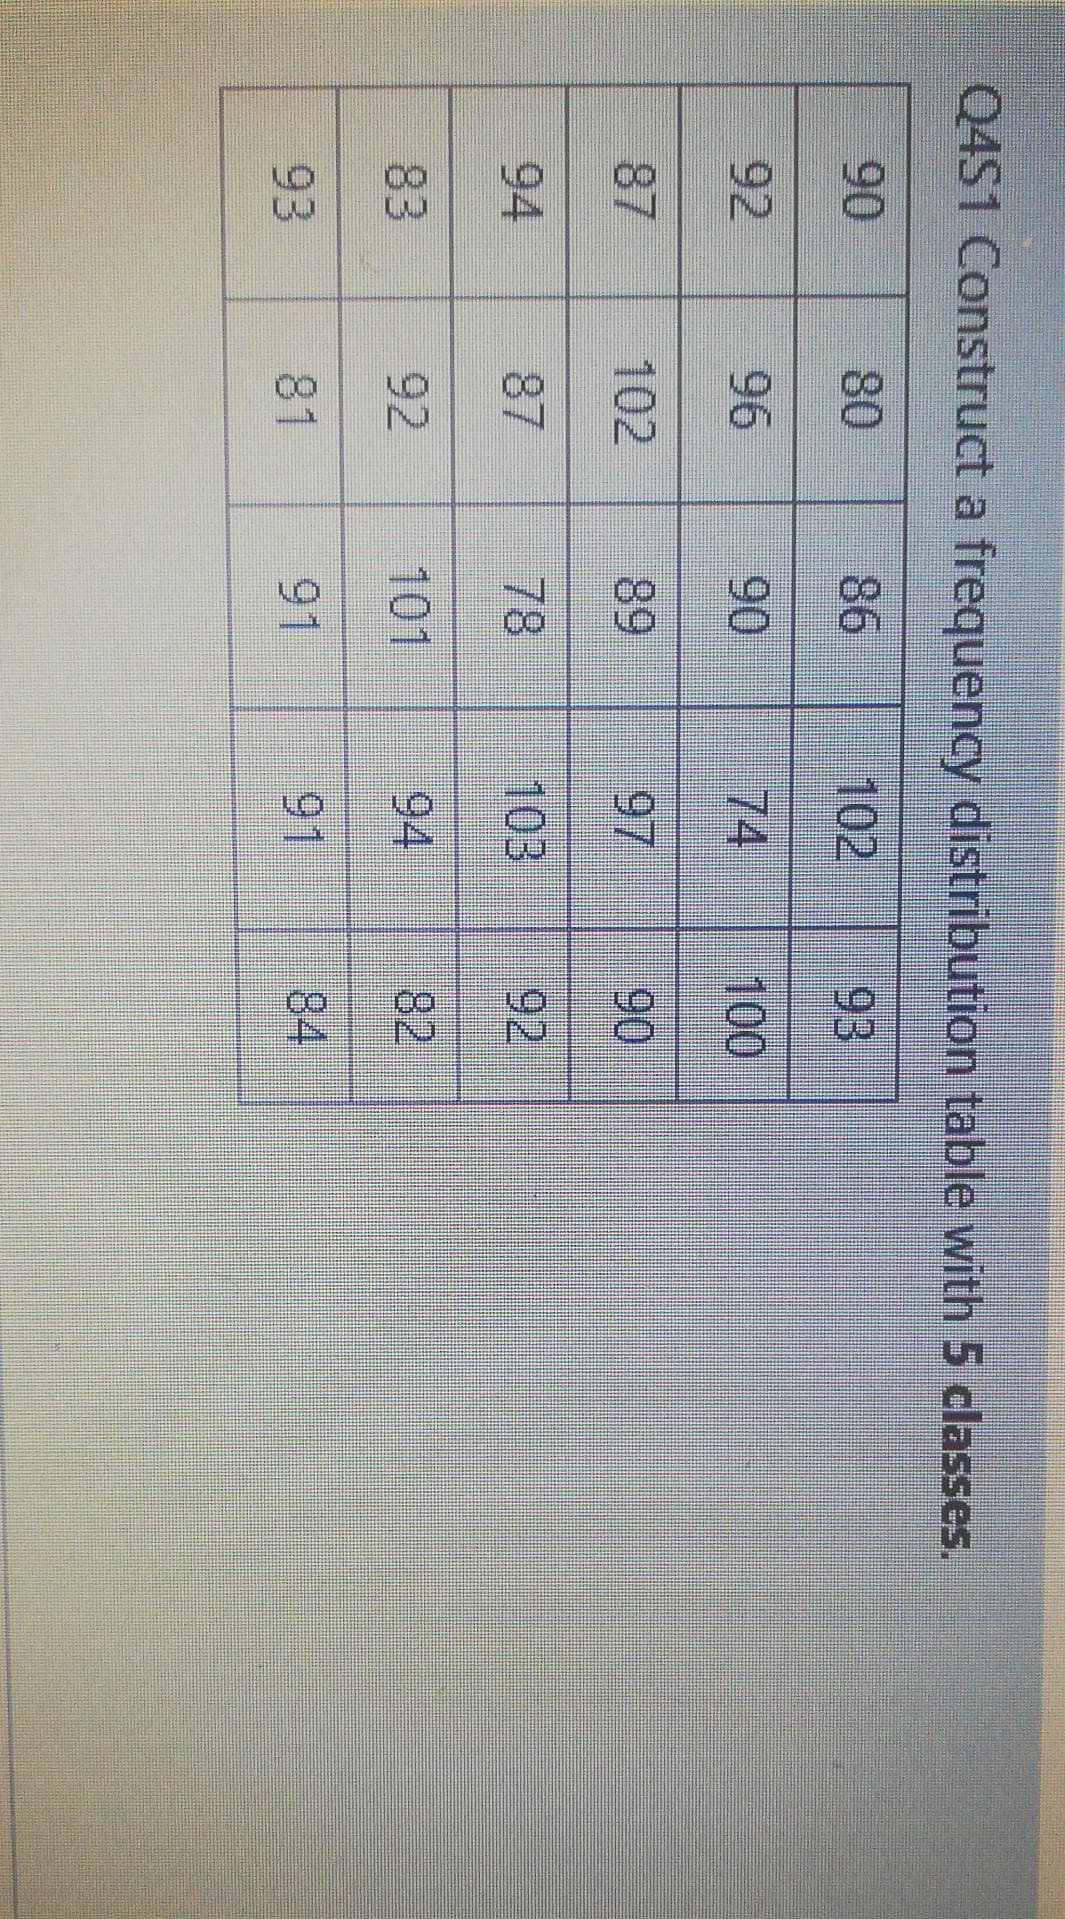 Q4S1 Construct a frequency distribution table with 5 classes.
90
80
98
102
74
93
92
96
90
100
87
102
89
97
90
94
87
78
103
92
83
92
101
94
82
93
81
91
91
84
